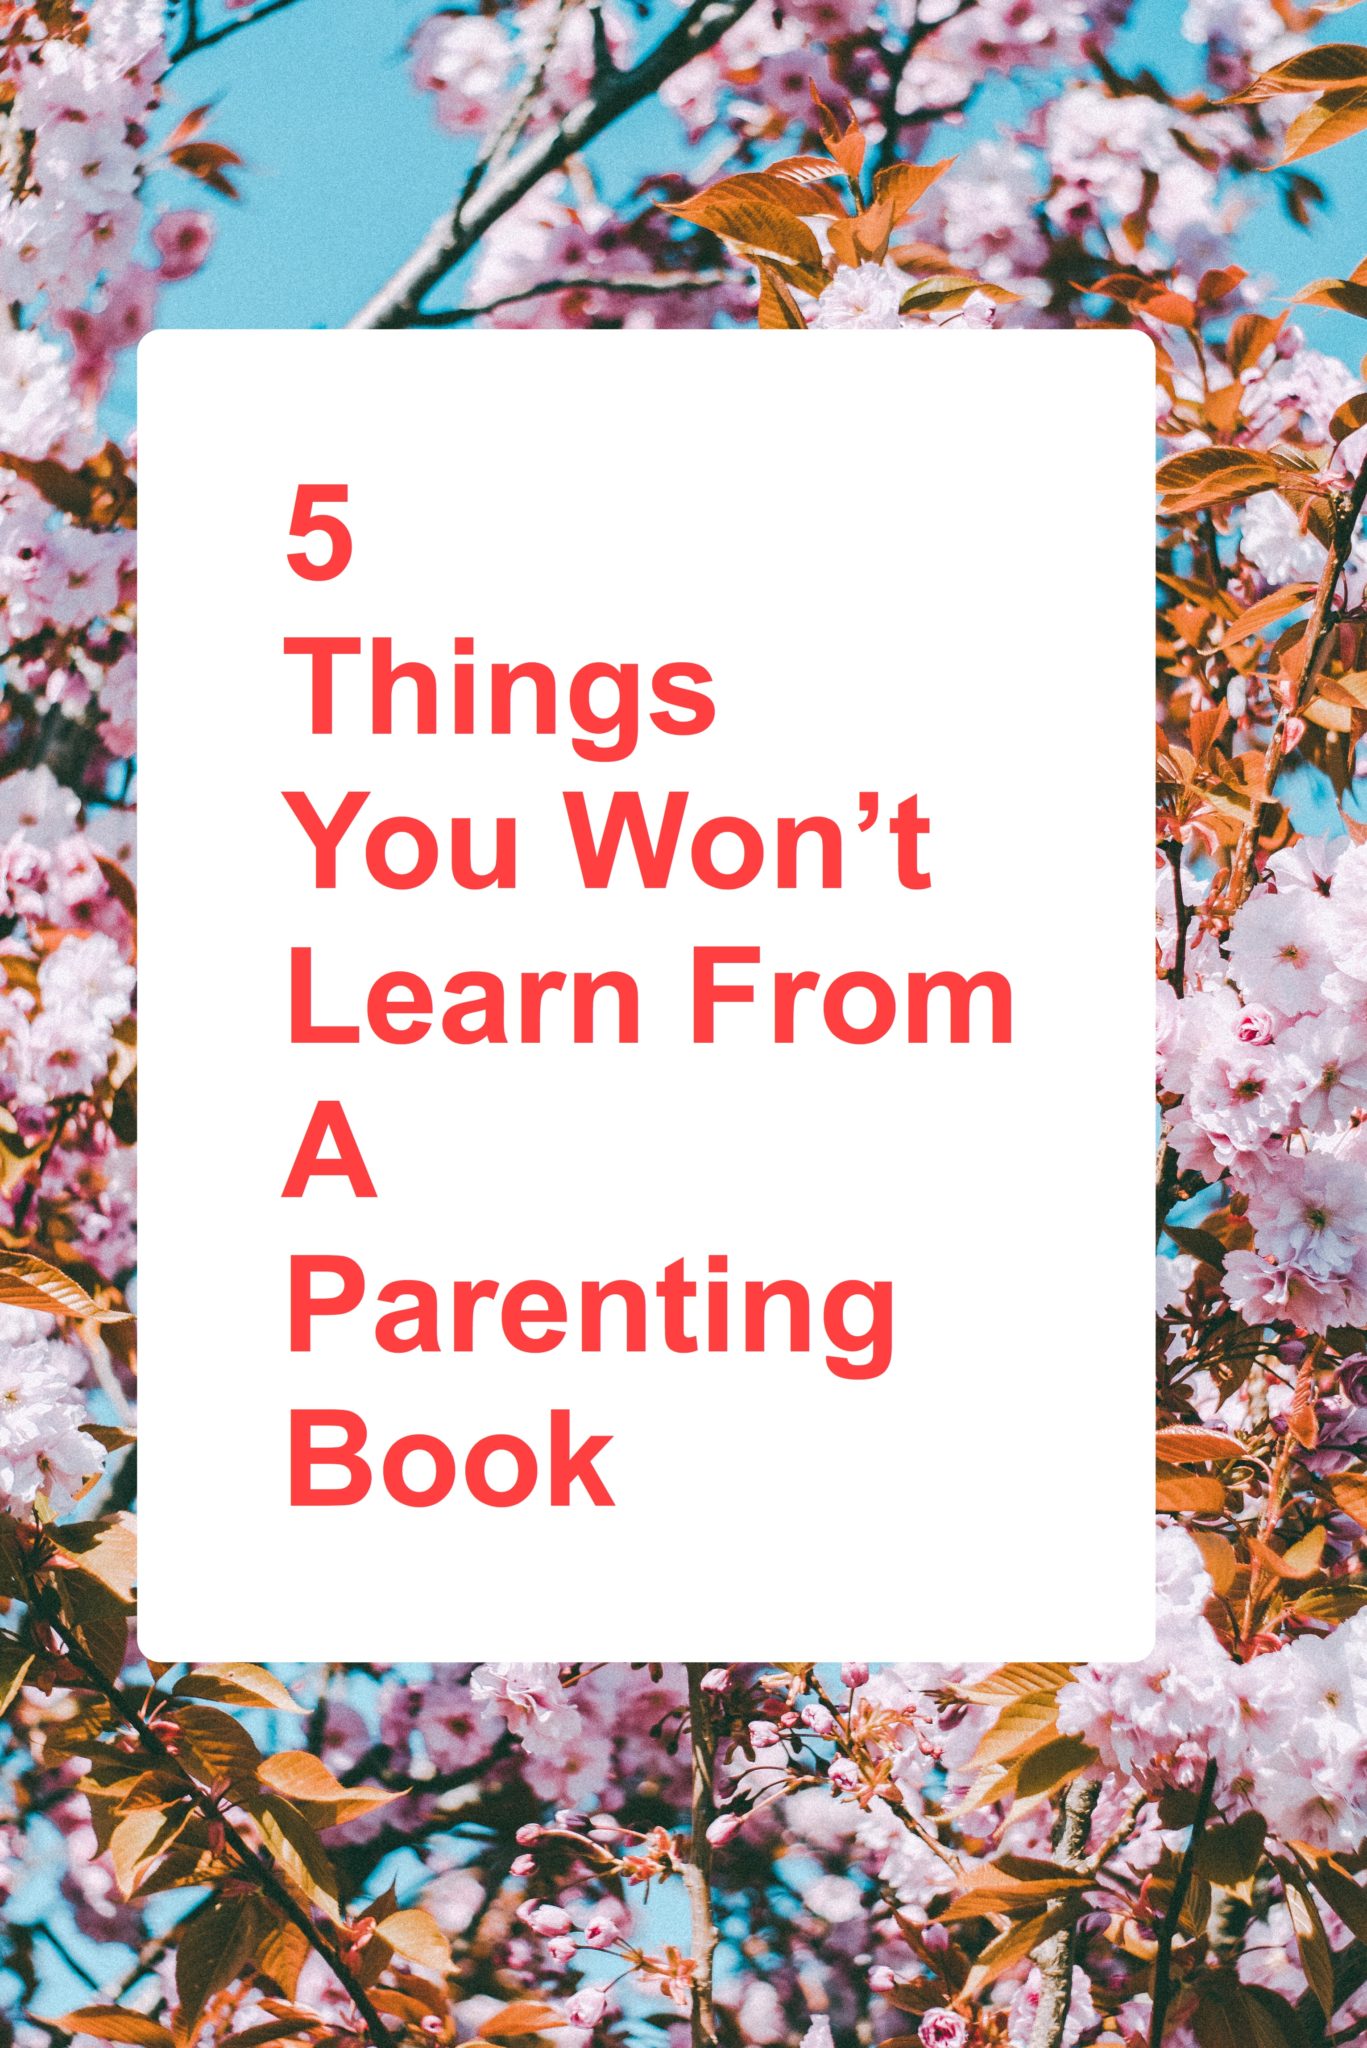 5 Things You Won’t Learn From a Parenting Book. Flowers pin.